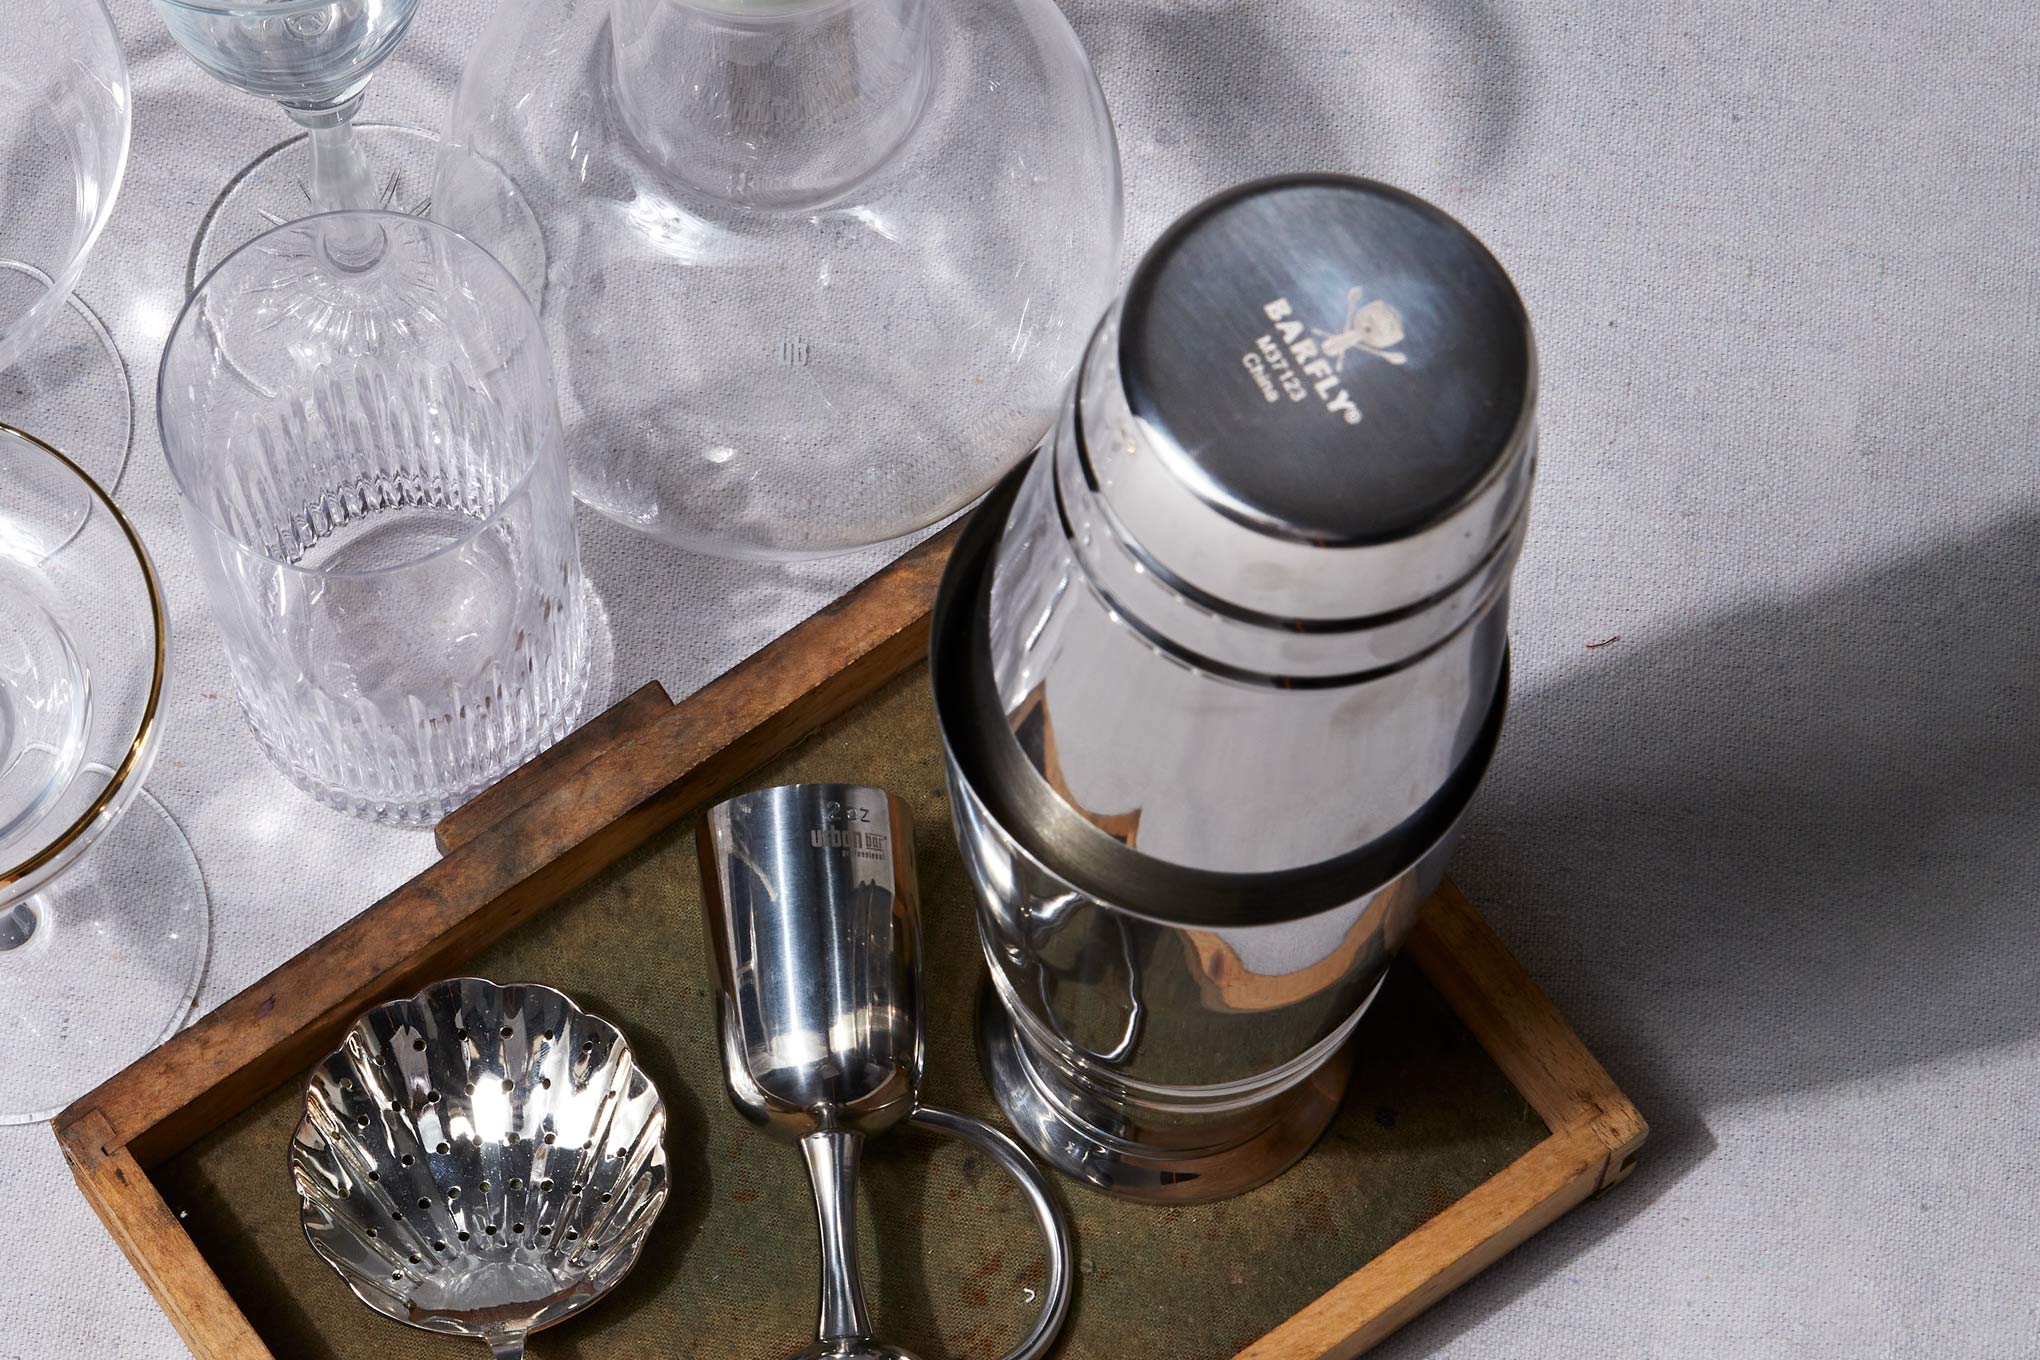 Cocktail Shaker - All Stainless Steel - Tumbler, Strainer and Cap - Holds  16 oz. - Great for Your Home Bar or as a Gift to Chill, Shake or Stir Mixed